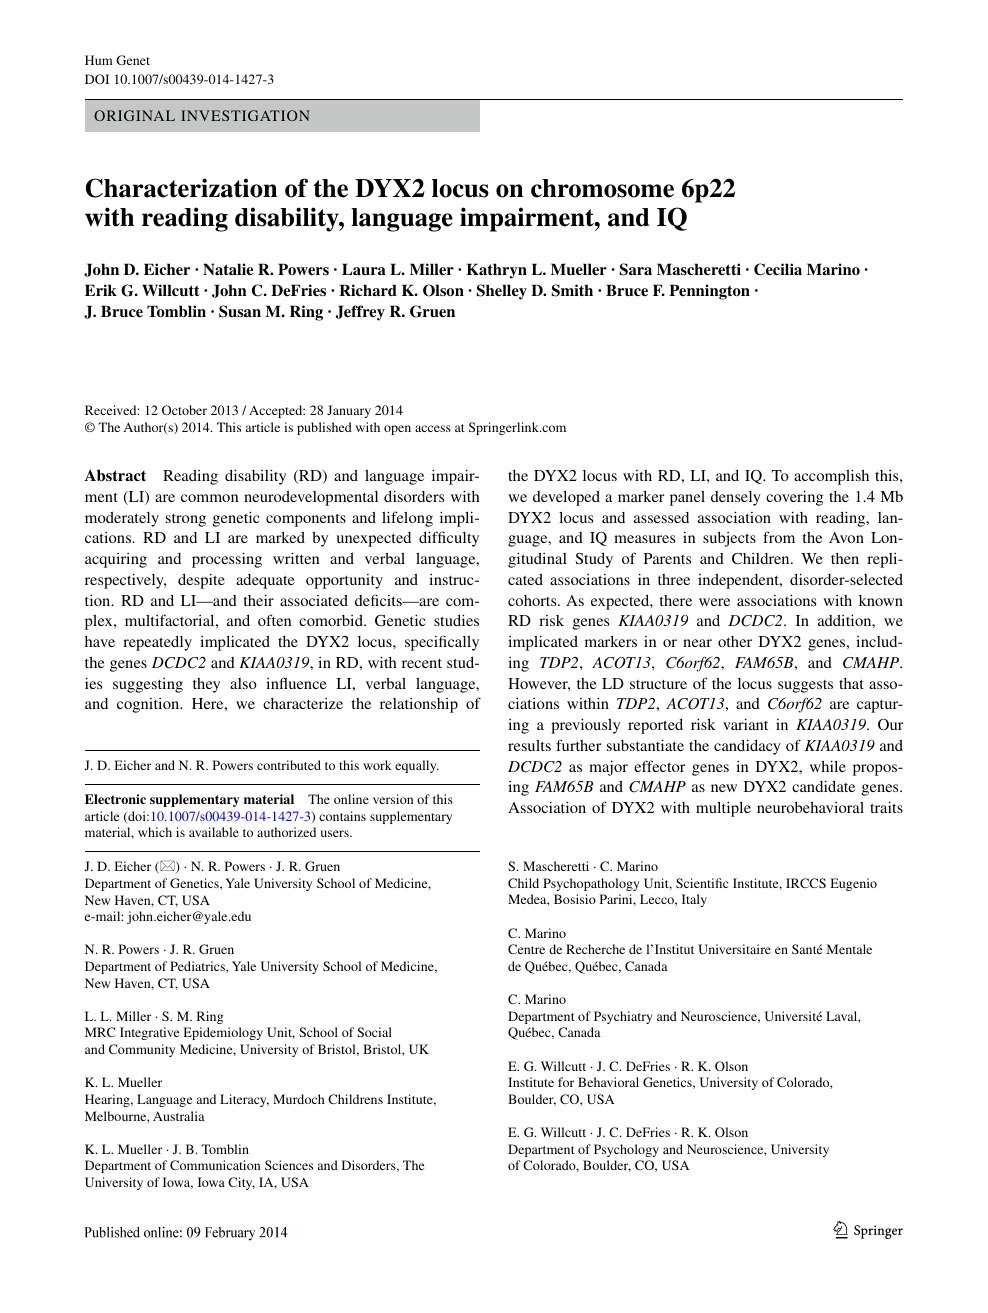 Characterization Of The Dyx2 Locus On Chromosome 6p22 With Reading Disability Language Impairment And Iq Topic Of Research Paper In Biological Sciences Download Scholarly Article Pdf And Read For Free On